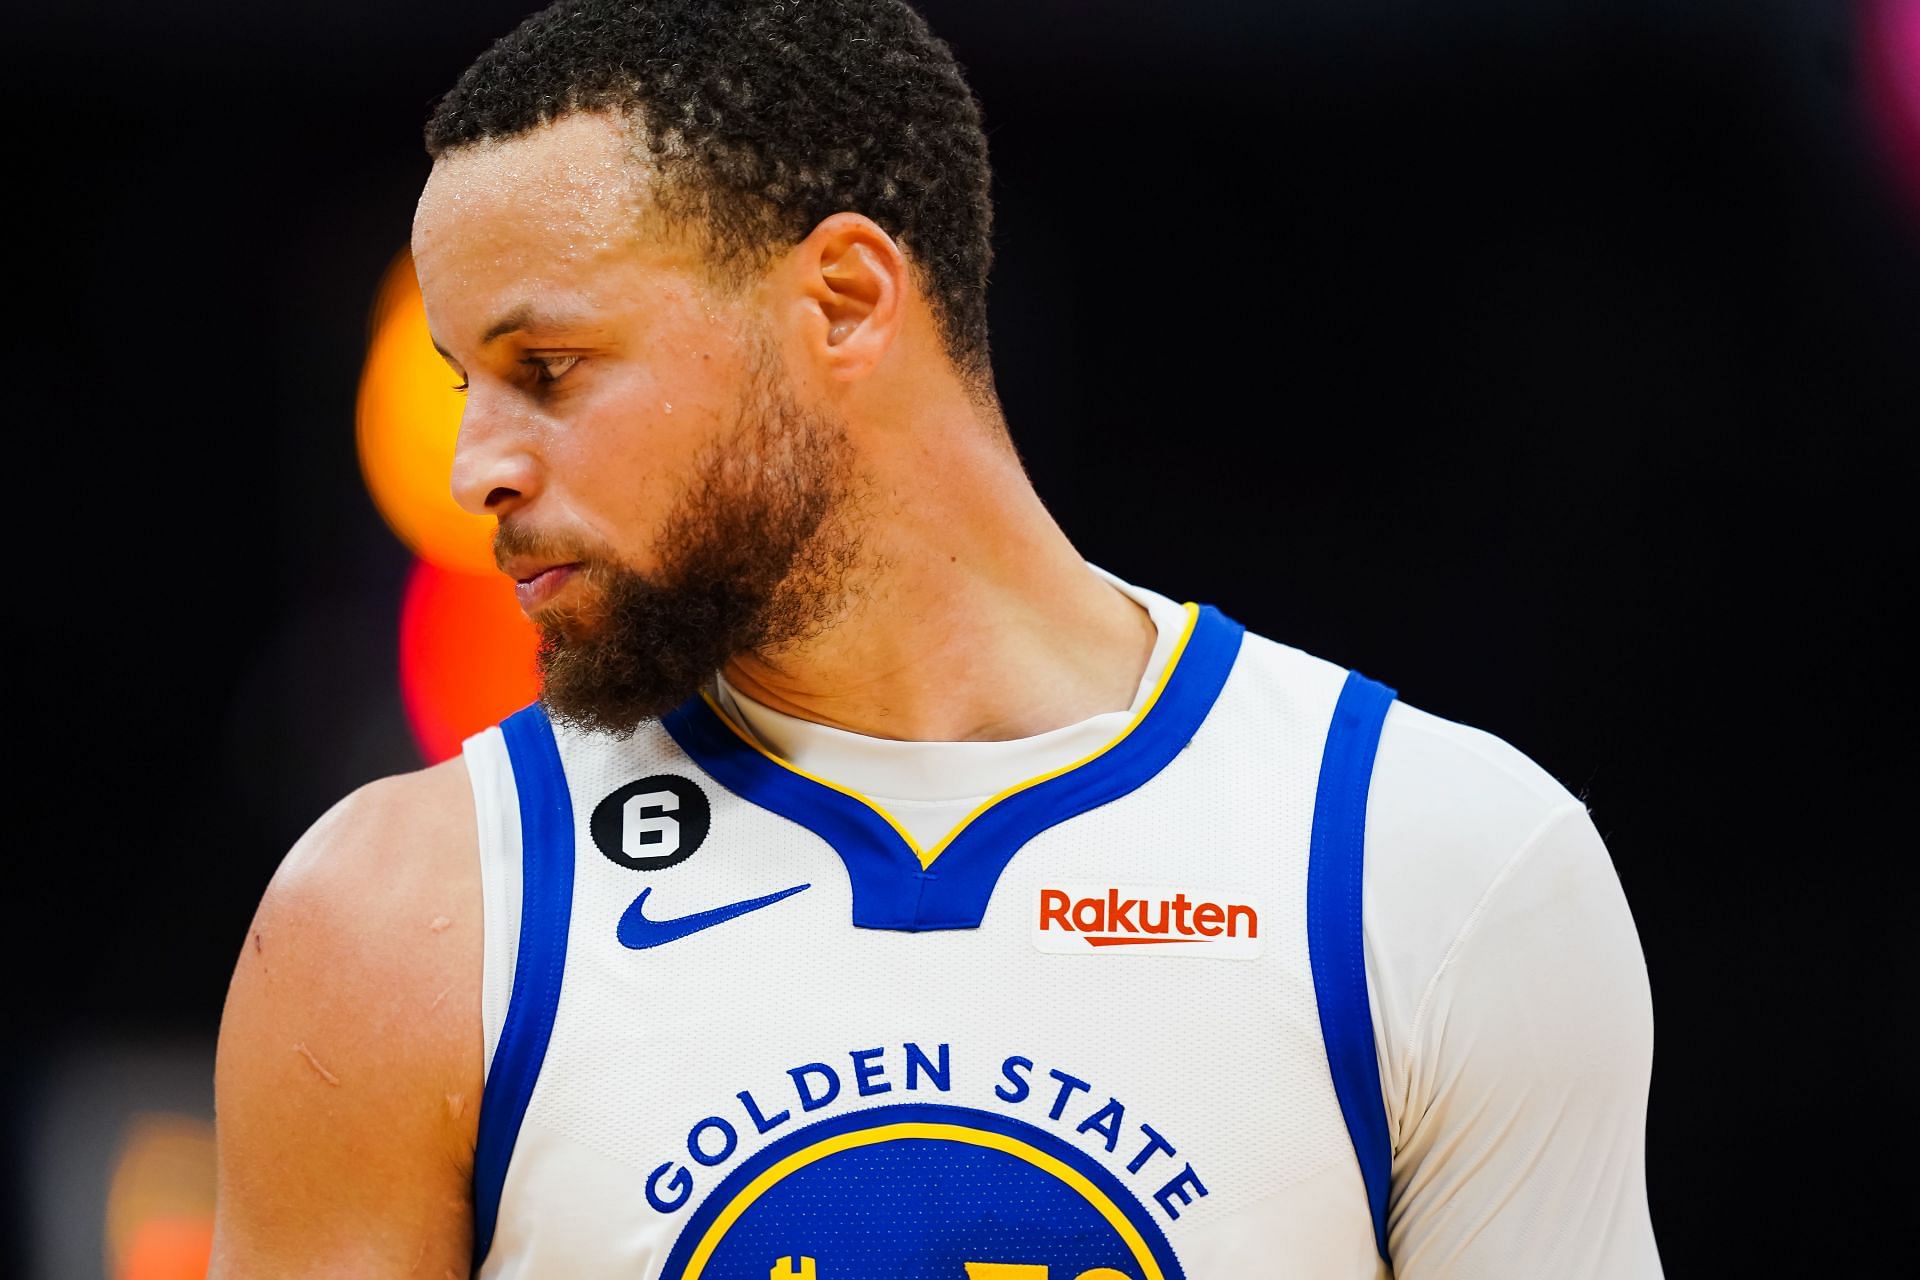 Superstar point guard Steph Curry led Golden State to a win over the Houston Rockets